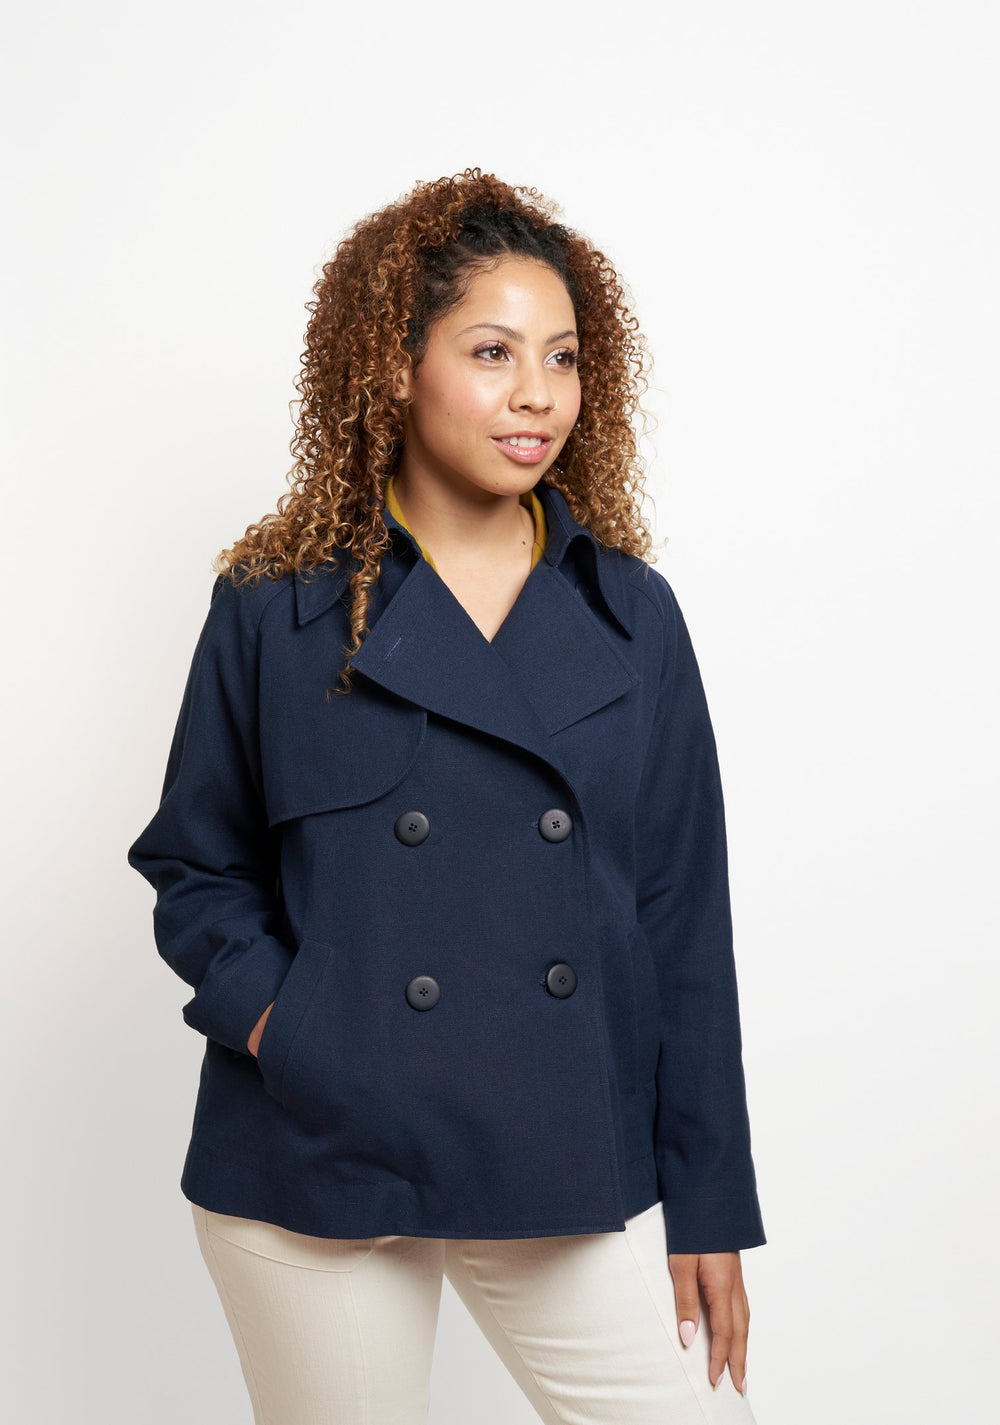 Woman wearing the Cortland Trench sewing pattern from Grainline Studio on The Fold Line. A double-breasted trench coat pattern made in cotton, tencel twill, gabardine or linen fabrics, featuring mid-hip length, raglan sleeves, storm flaps, collar, front b